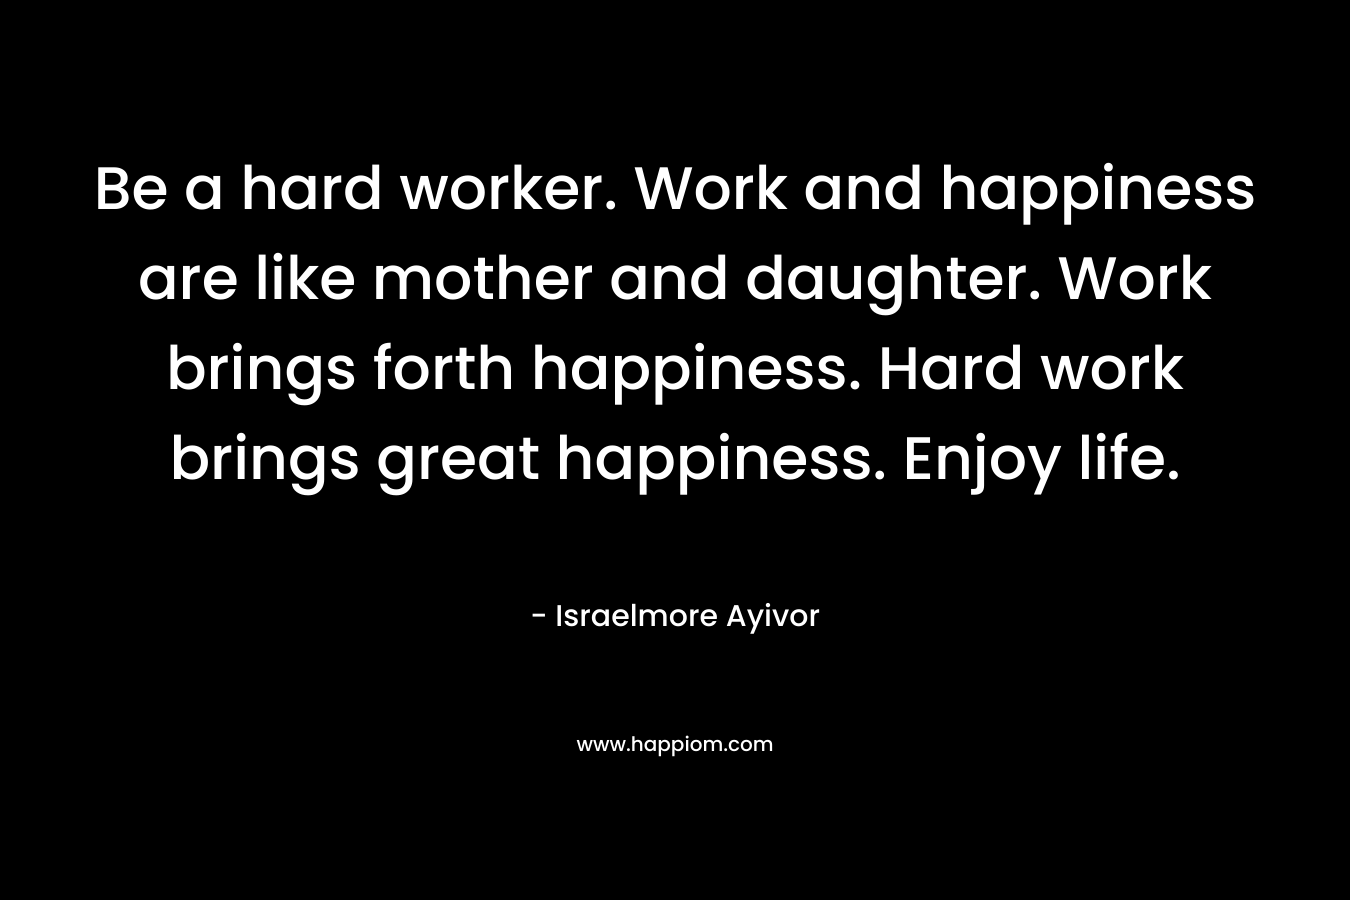 Be a hard worker. Work and happiness are like mother and daughter. Work brings forth happiness. Hard work brings great happiness. Enjoy life.